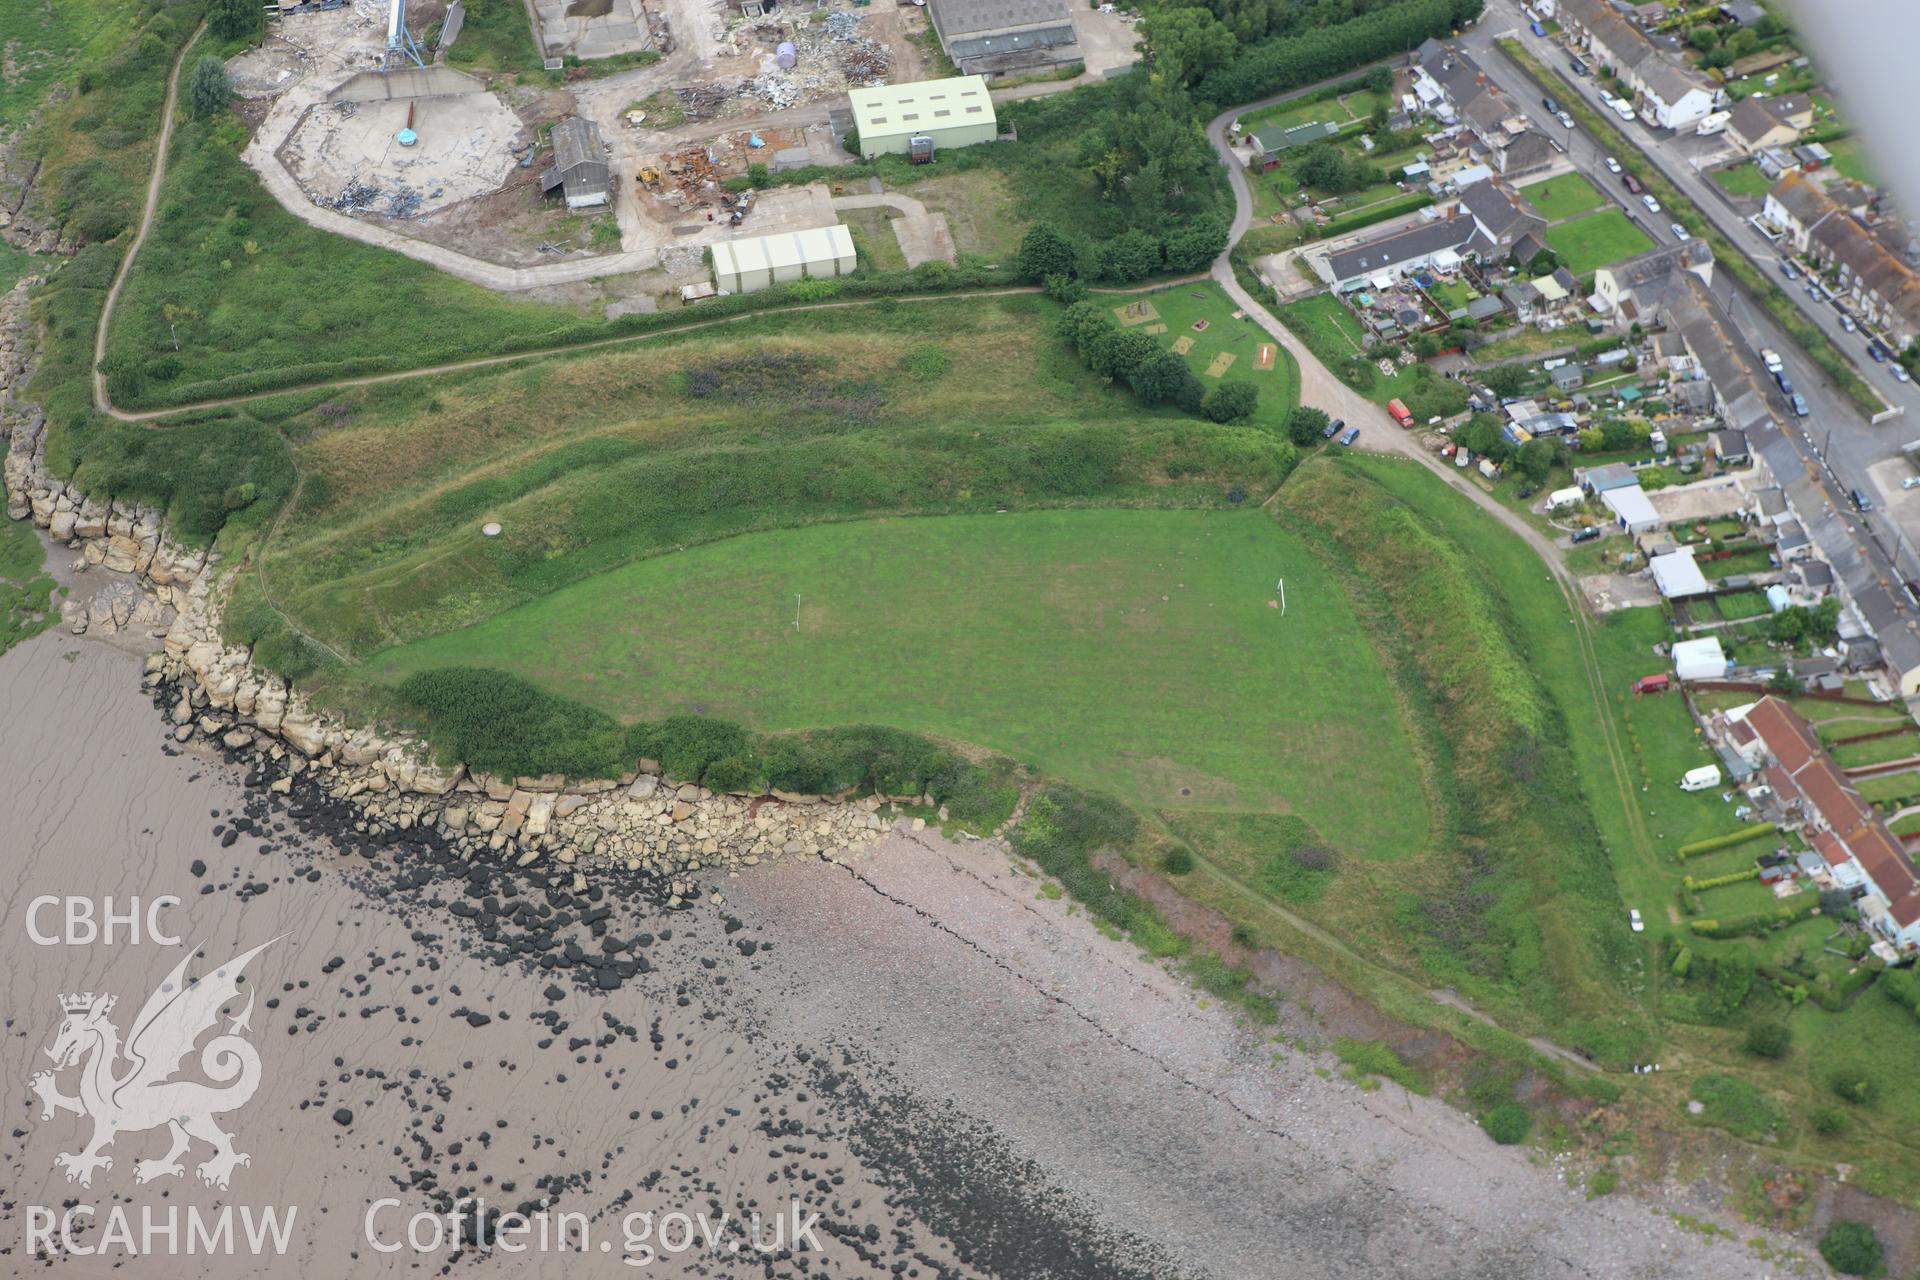 RCAHMW colour oblique aerial photograph of Sudbrook Fort, Portskewett. Taken on 09 July 2009 by Toby Driver